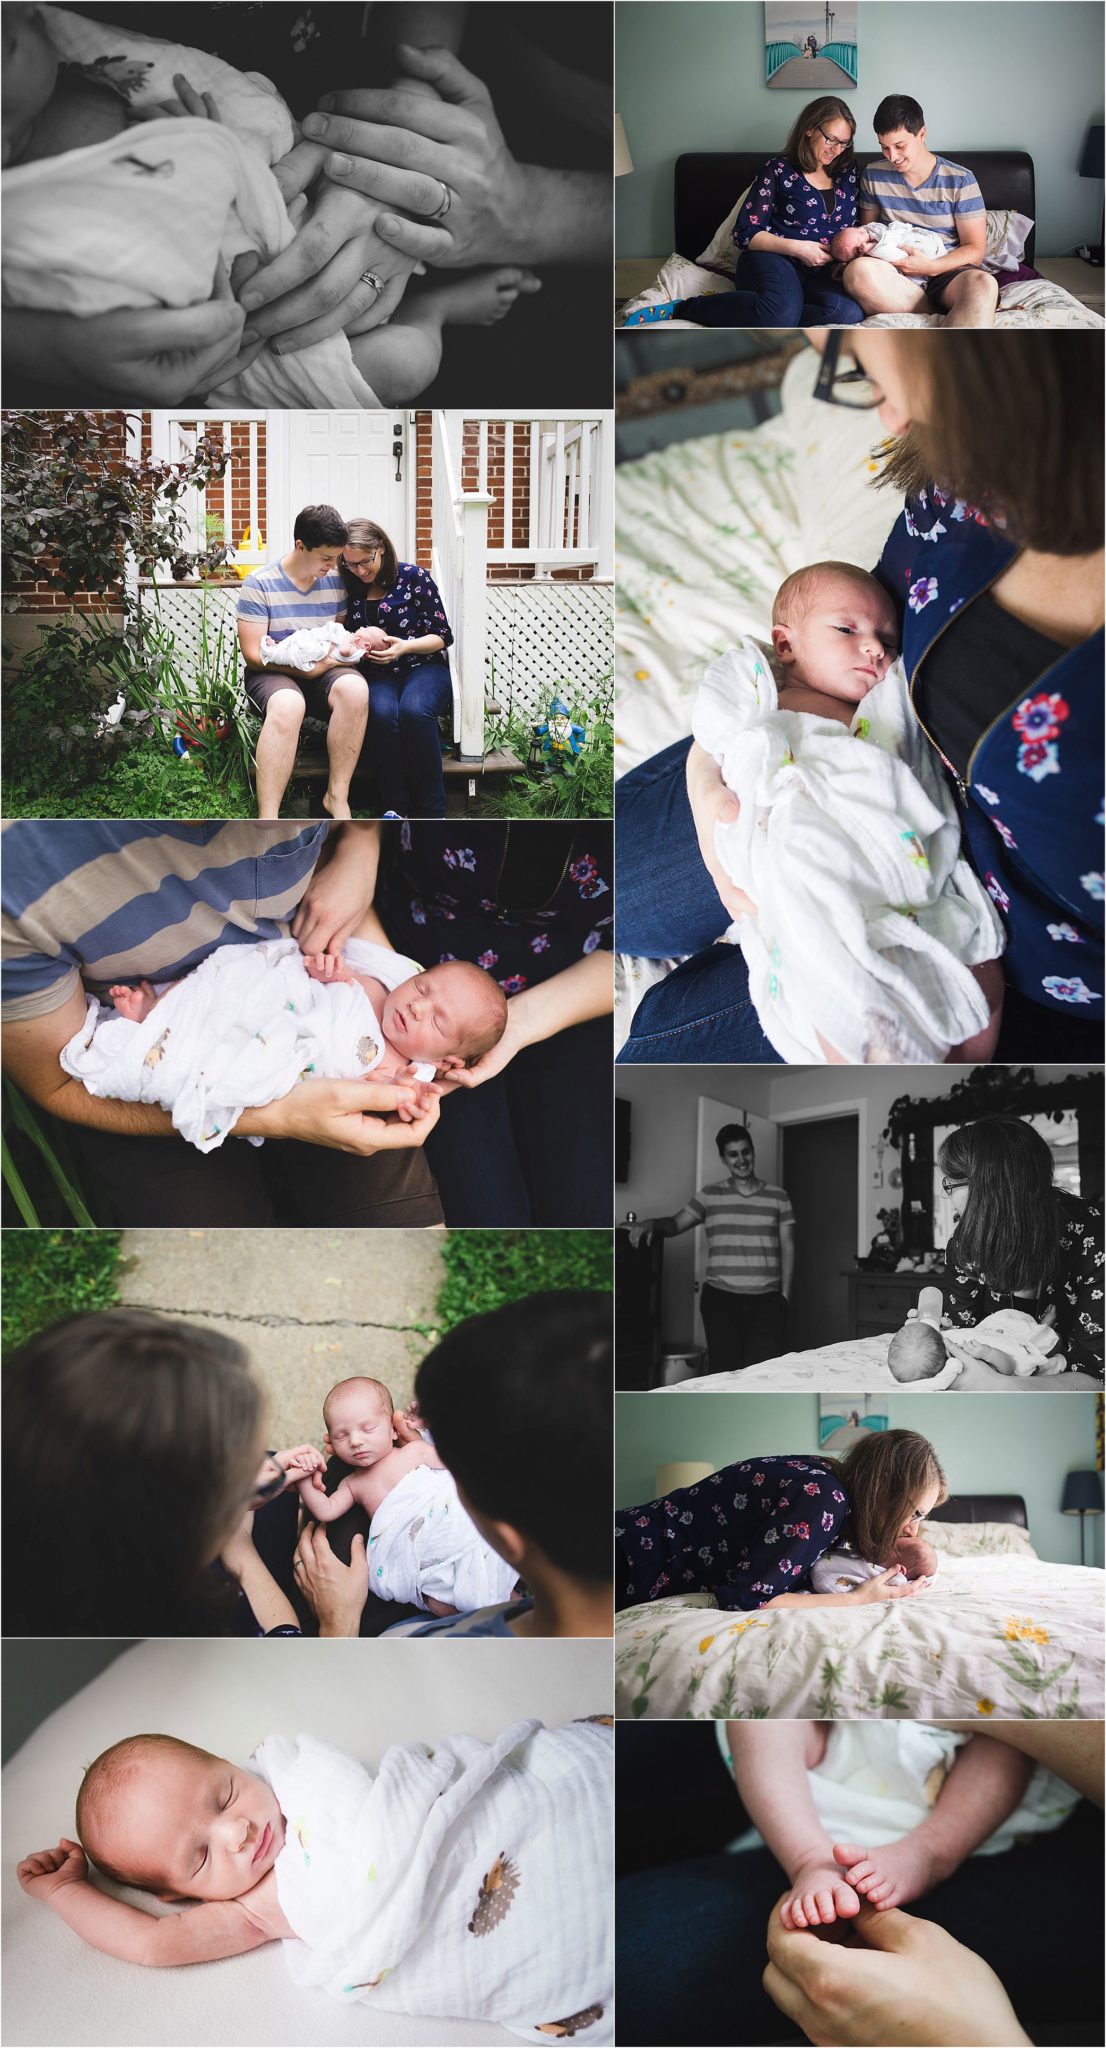 Newborn Photography Session with Michelle Little Photography in Montreal, Quebec, Canada